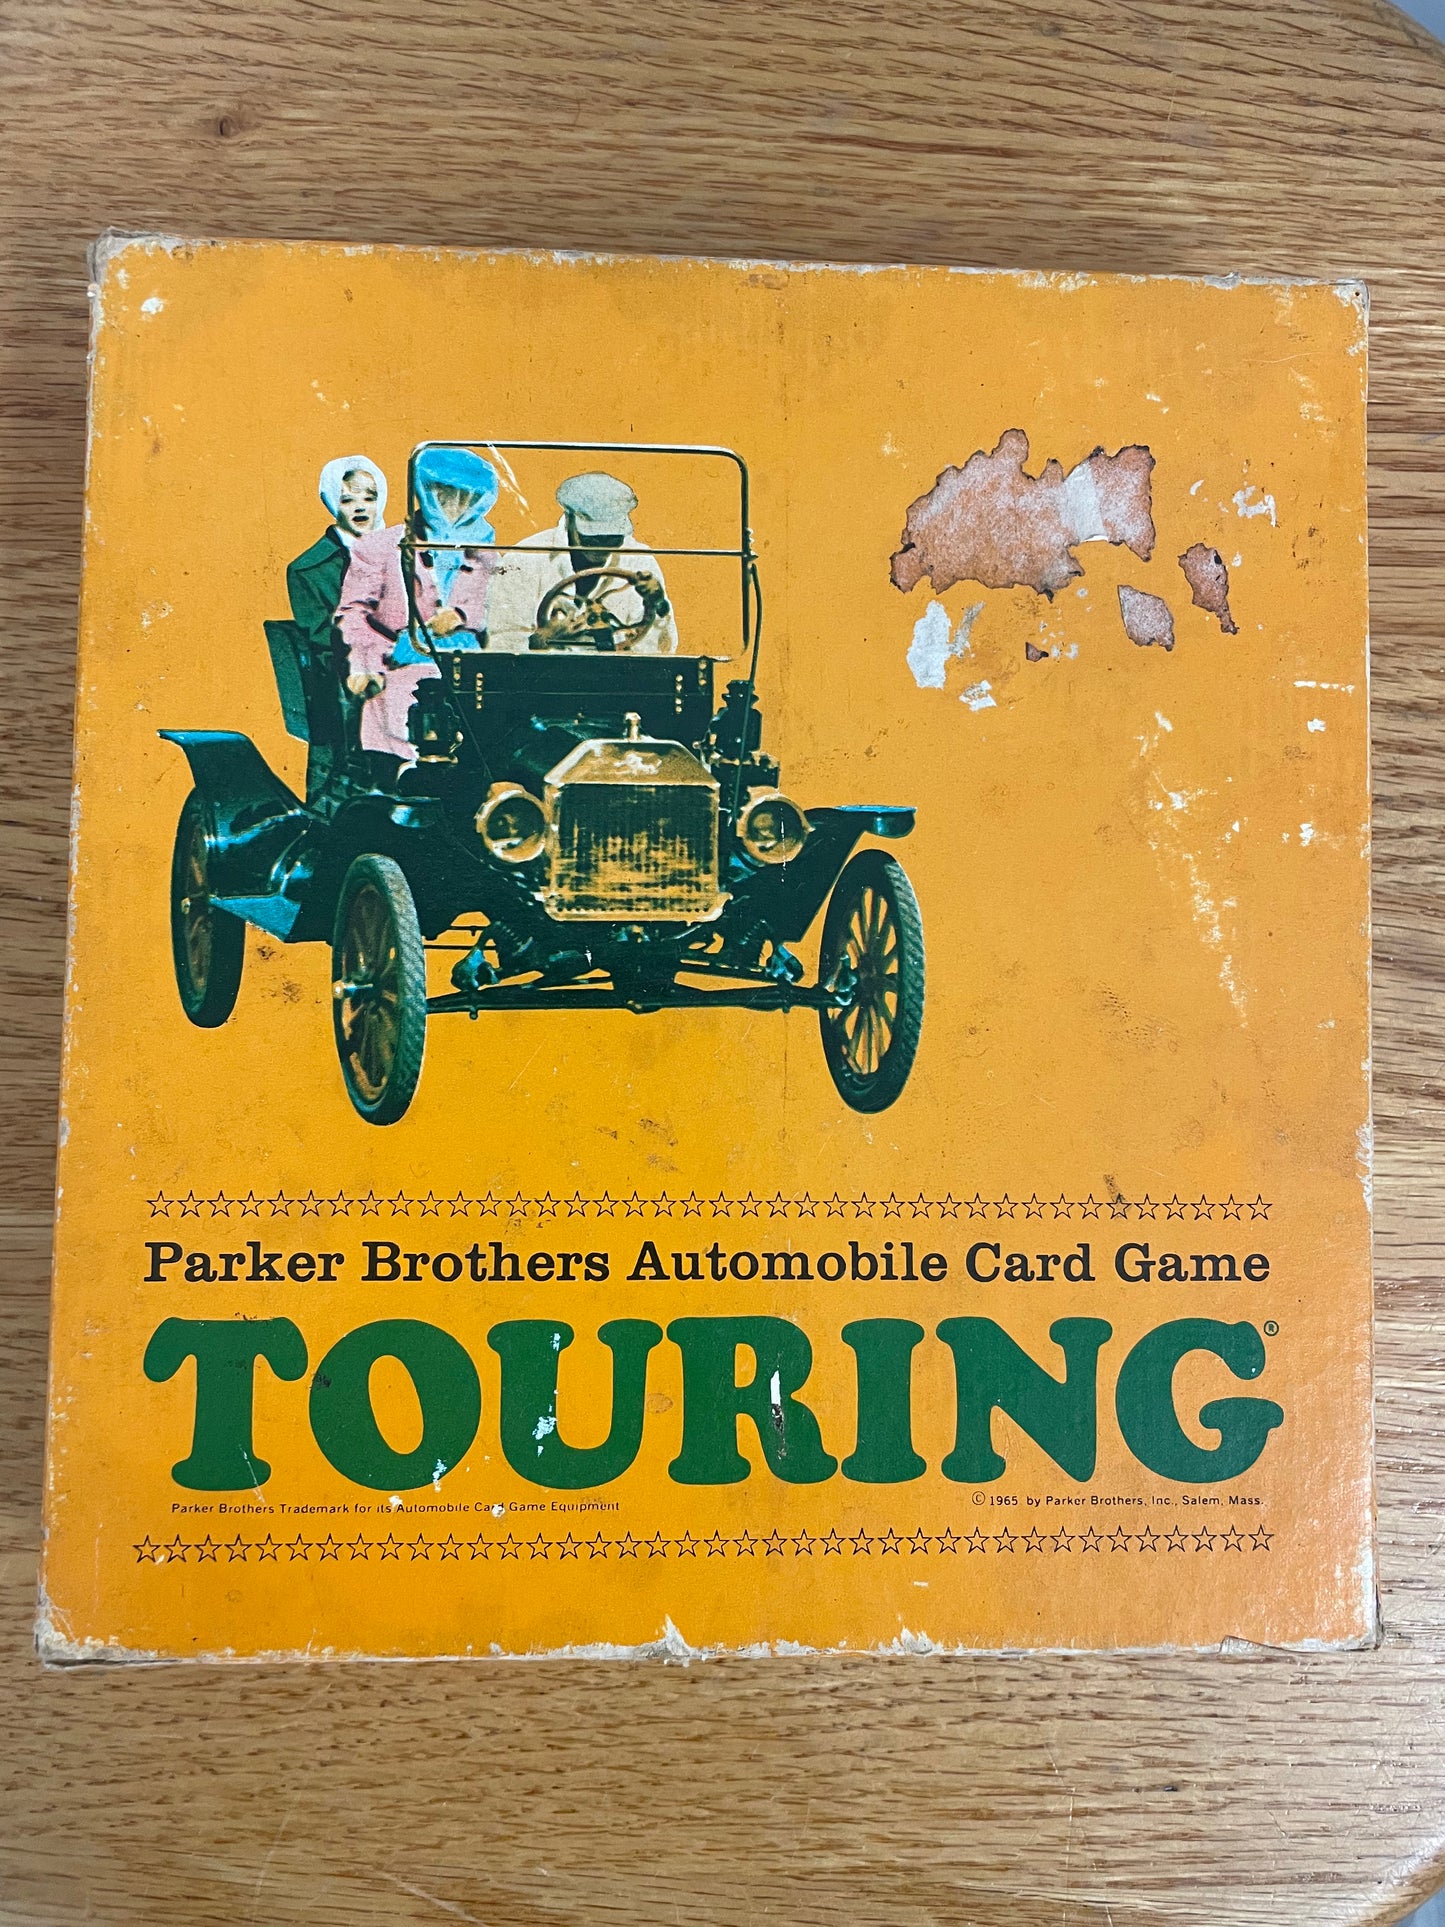 Touring 'Parker Brothers Automobile Card Game'